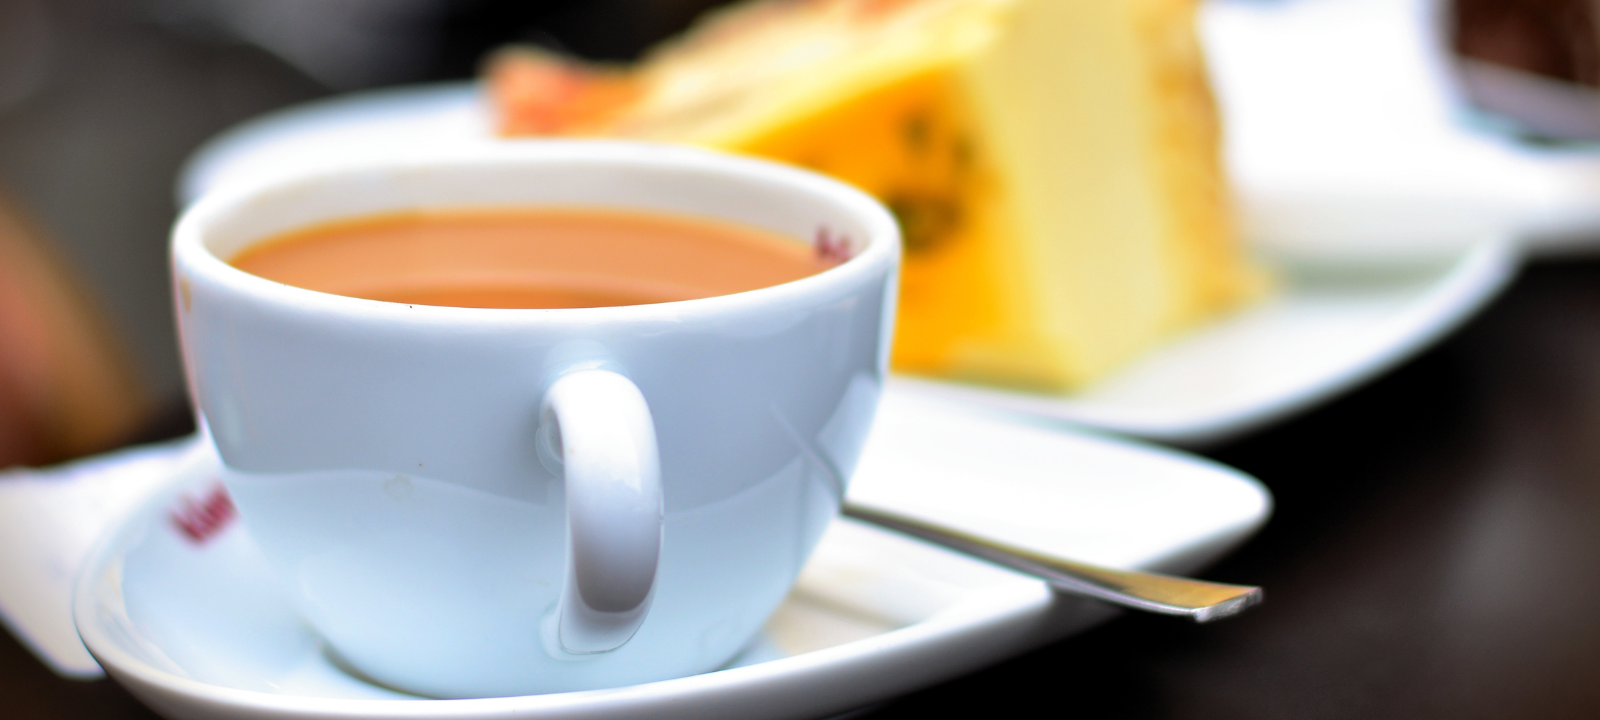 An image of a cup of tea and a piece of yellow cake